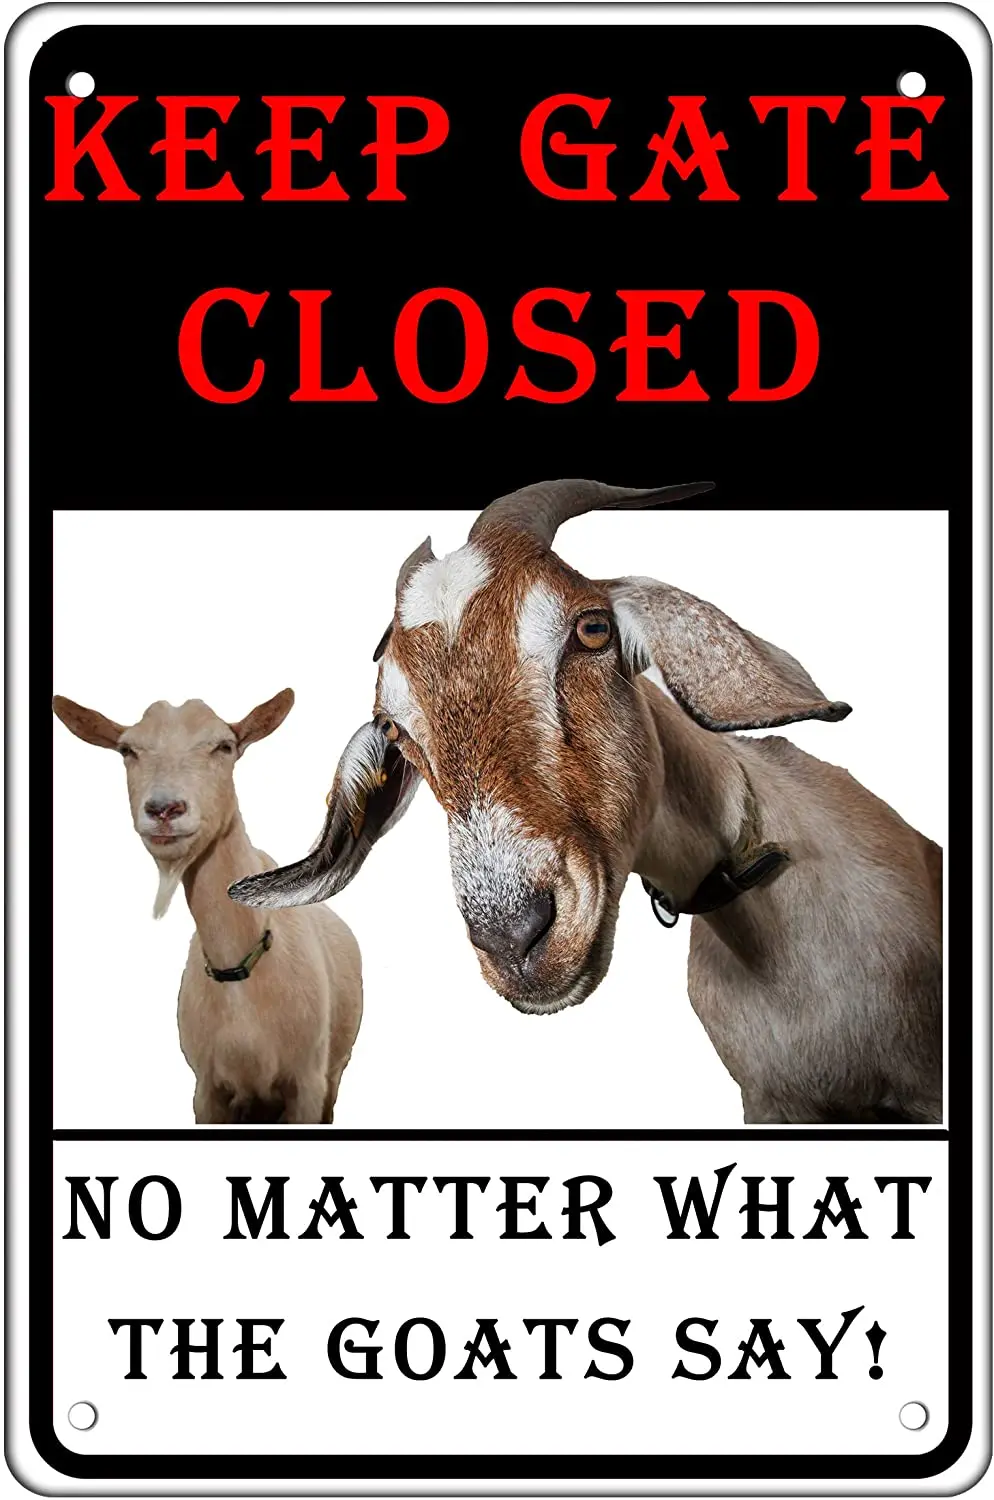 

Metal Wall Sign Keep Gate Closed No Matter What The Goats Say Tin Sign Plaque Farm Ranch Wall Decoration Vintage Metal Plate